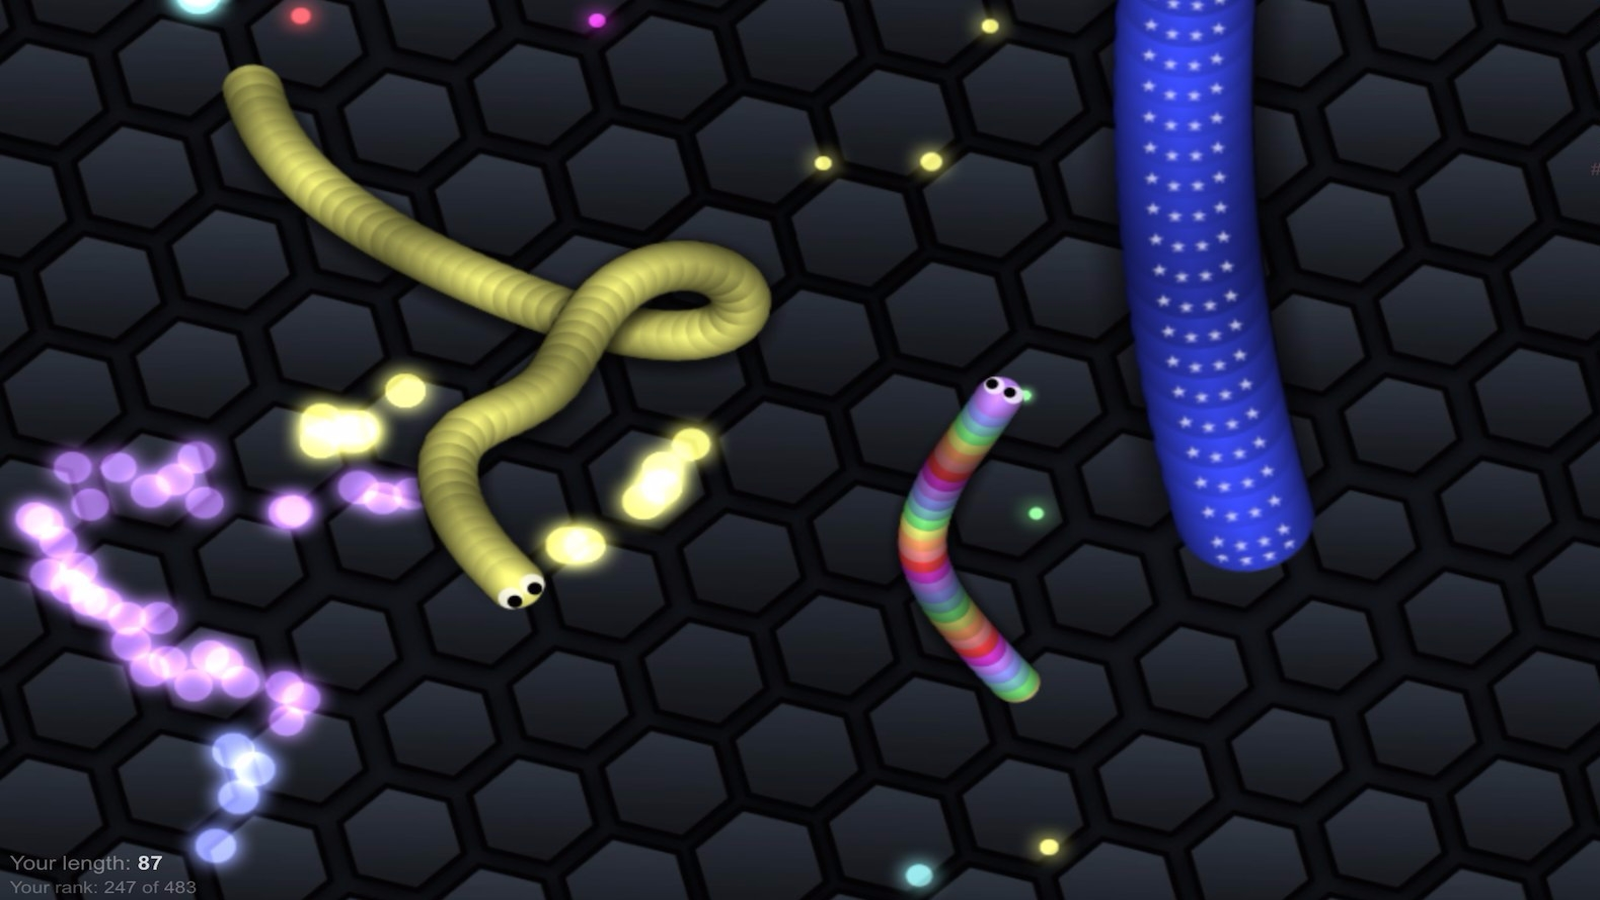 Slither.io - Snakes on a plain (background)